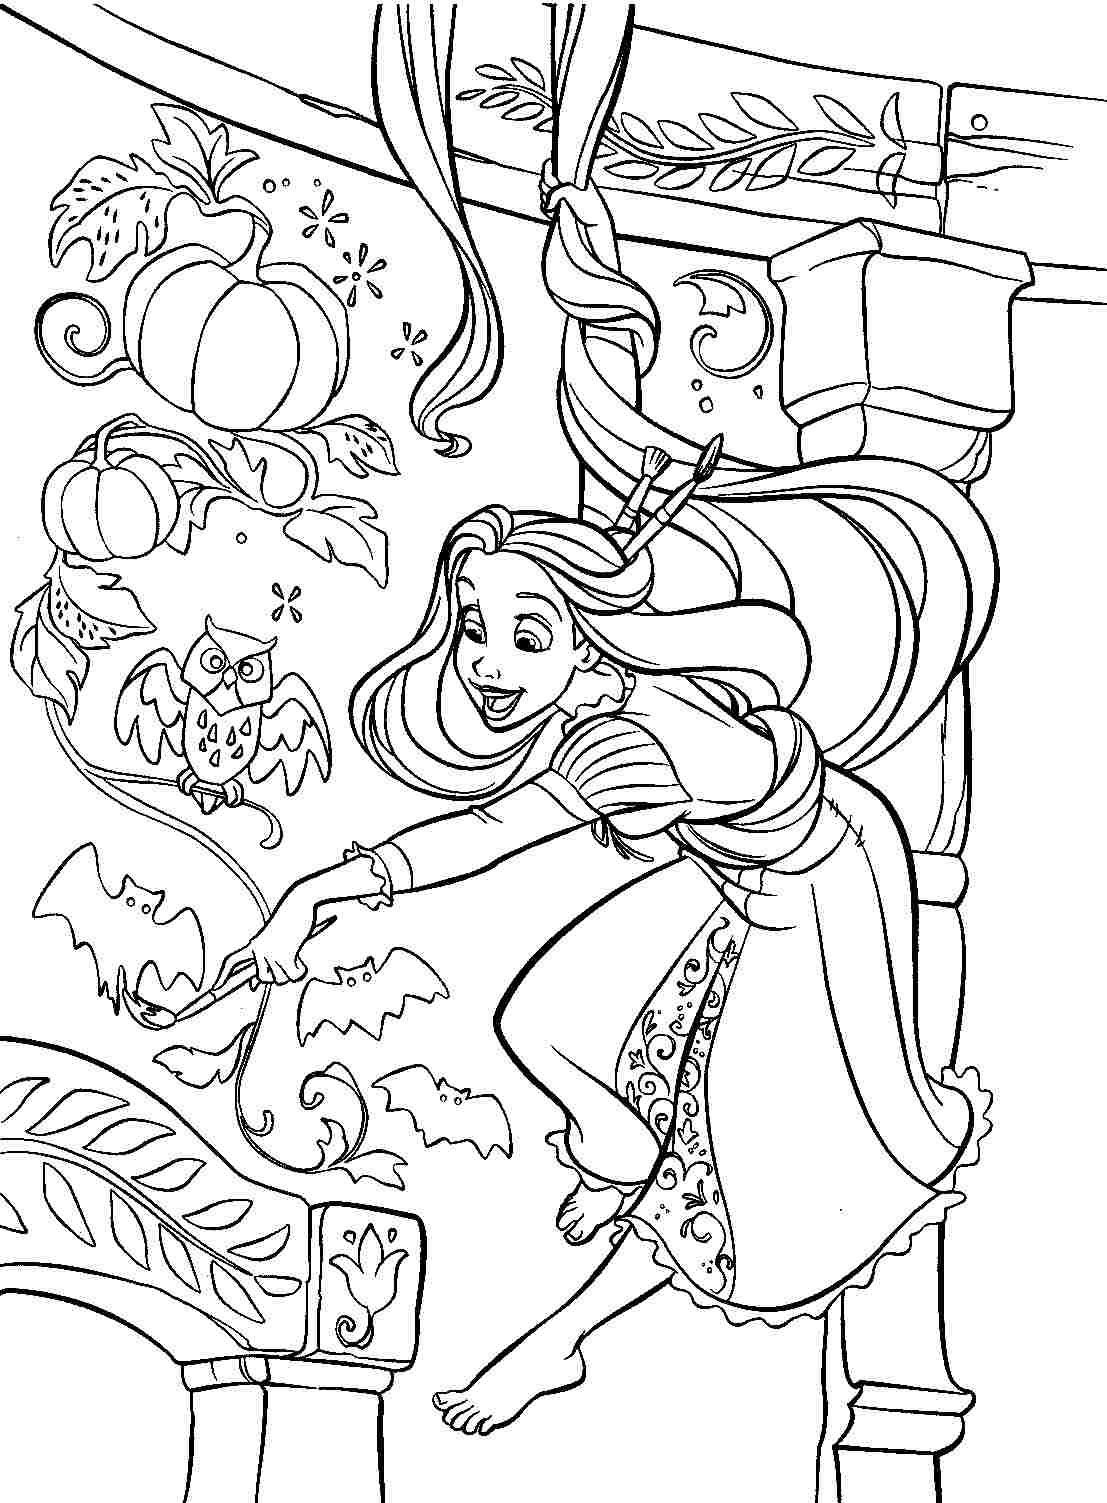 Coloring Pages For Adults Disney at GetColorings.com | Free printable colorings pages to print ...